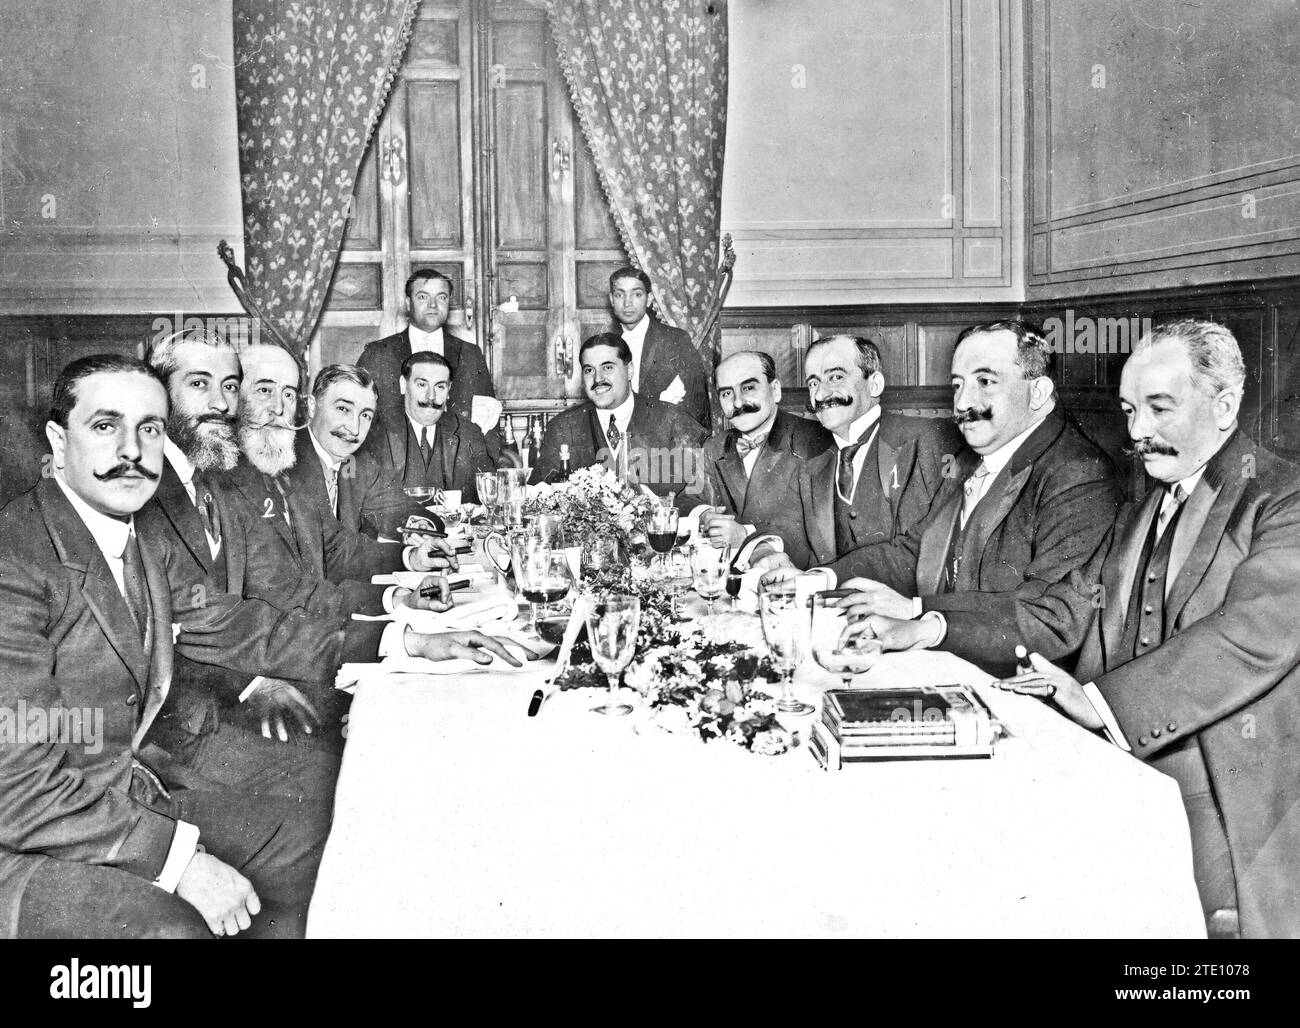 12/27/1912. Yesterday's banquet in Congress. The president of the Council, Mr. Conde de Romanones (1), at the banquet offered by the president of the Congress, Mr. Moret (2), to his companions at the chamber table. Credit: Album / Archivo ABC / Julio Duque Stock Photo